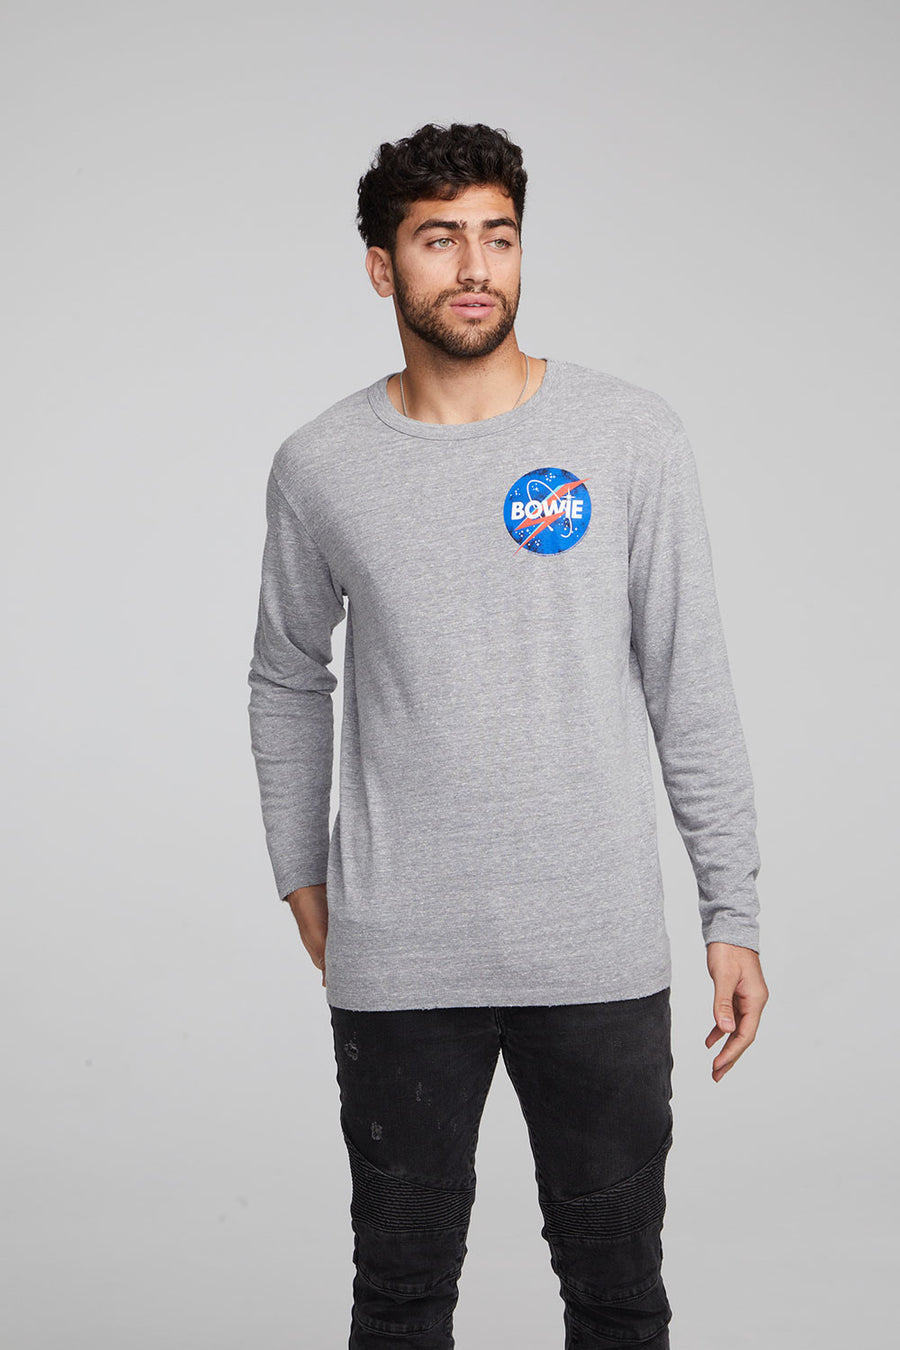 David Bowie Outer Space Long Sleeve Crew MENS chaserbrand